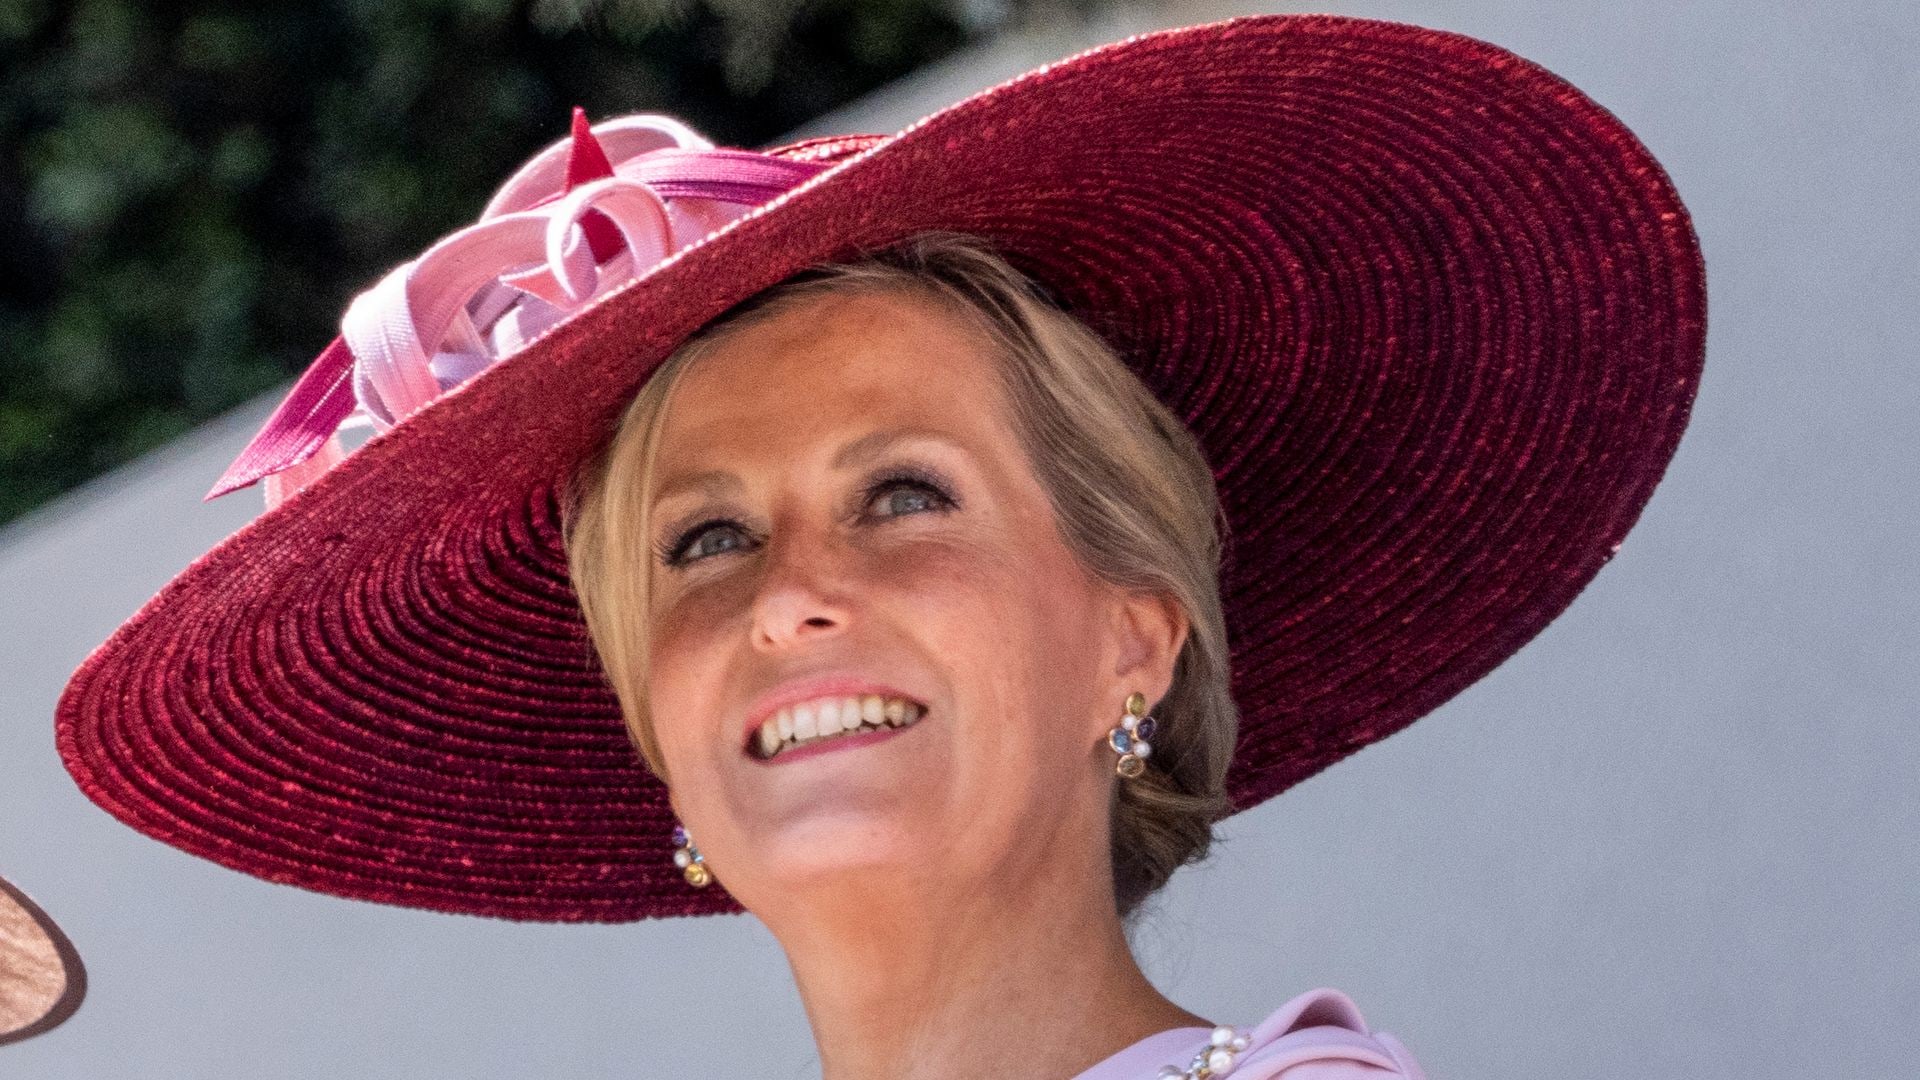 Sophie, Countess of Wessex attends the first day of Royal Ascot at Ascot Racecourse on June 14, 2022 in Ascot, England. 